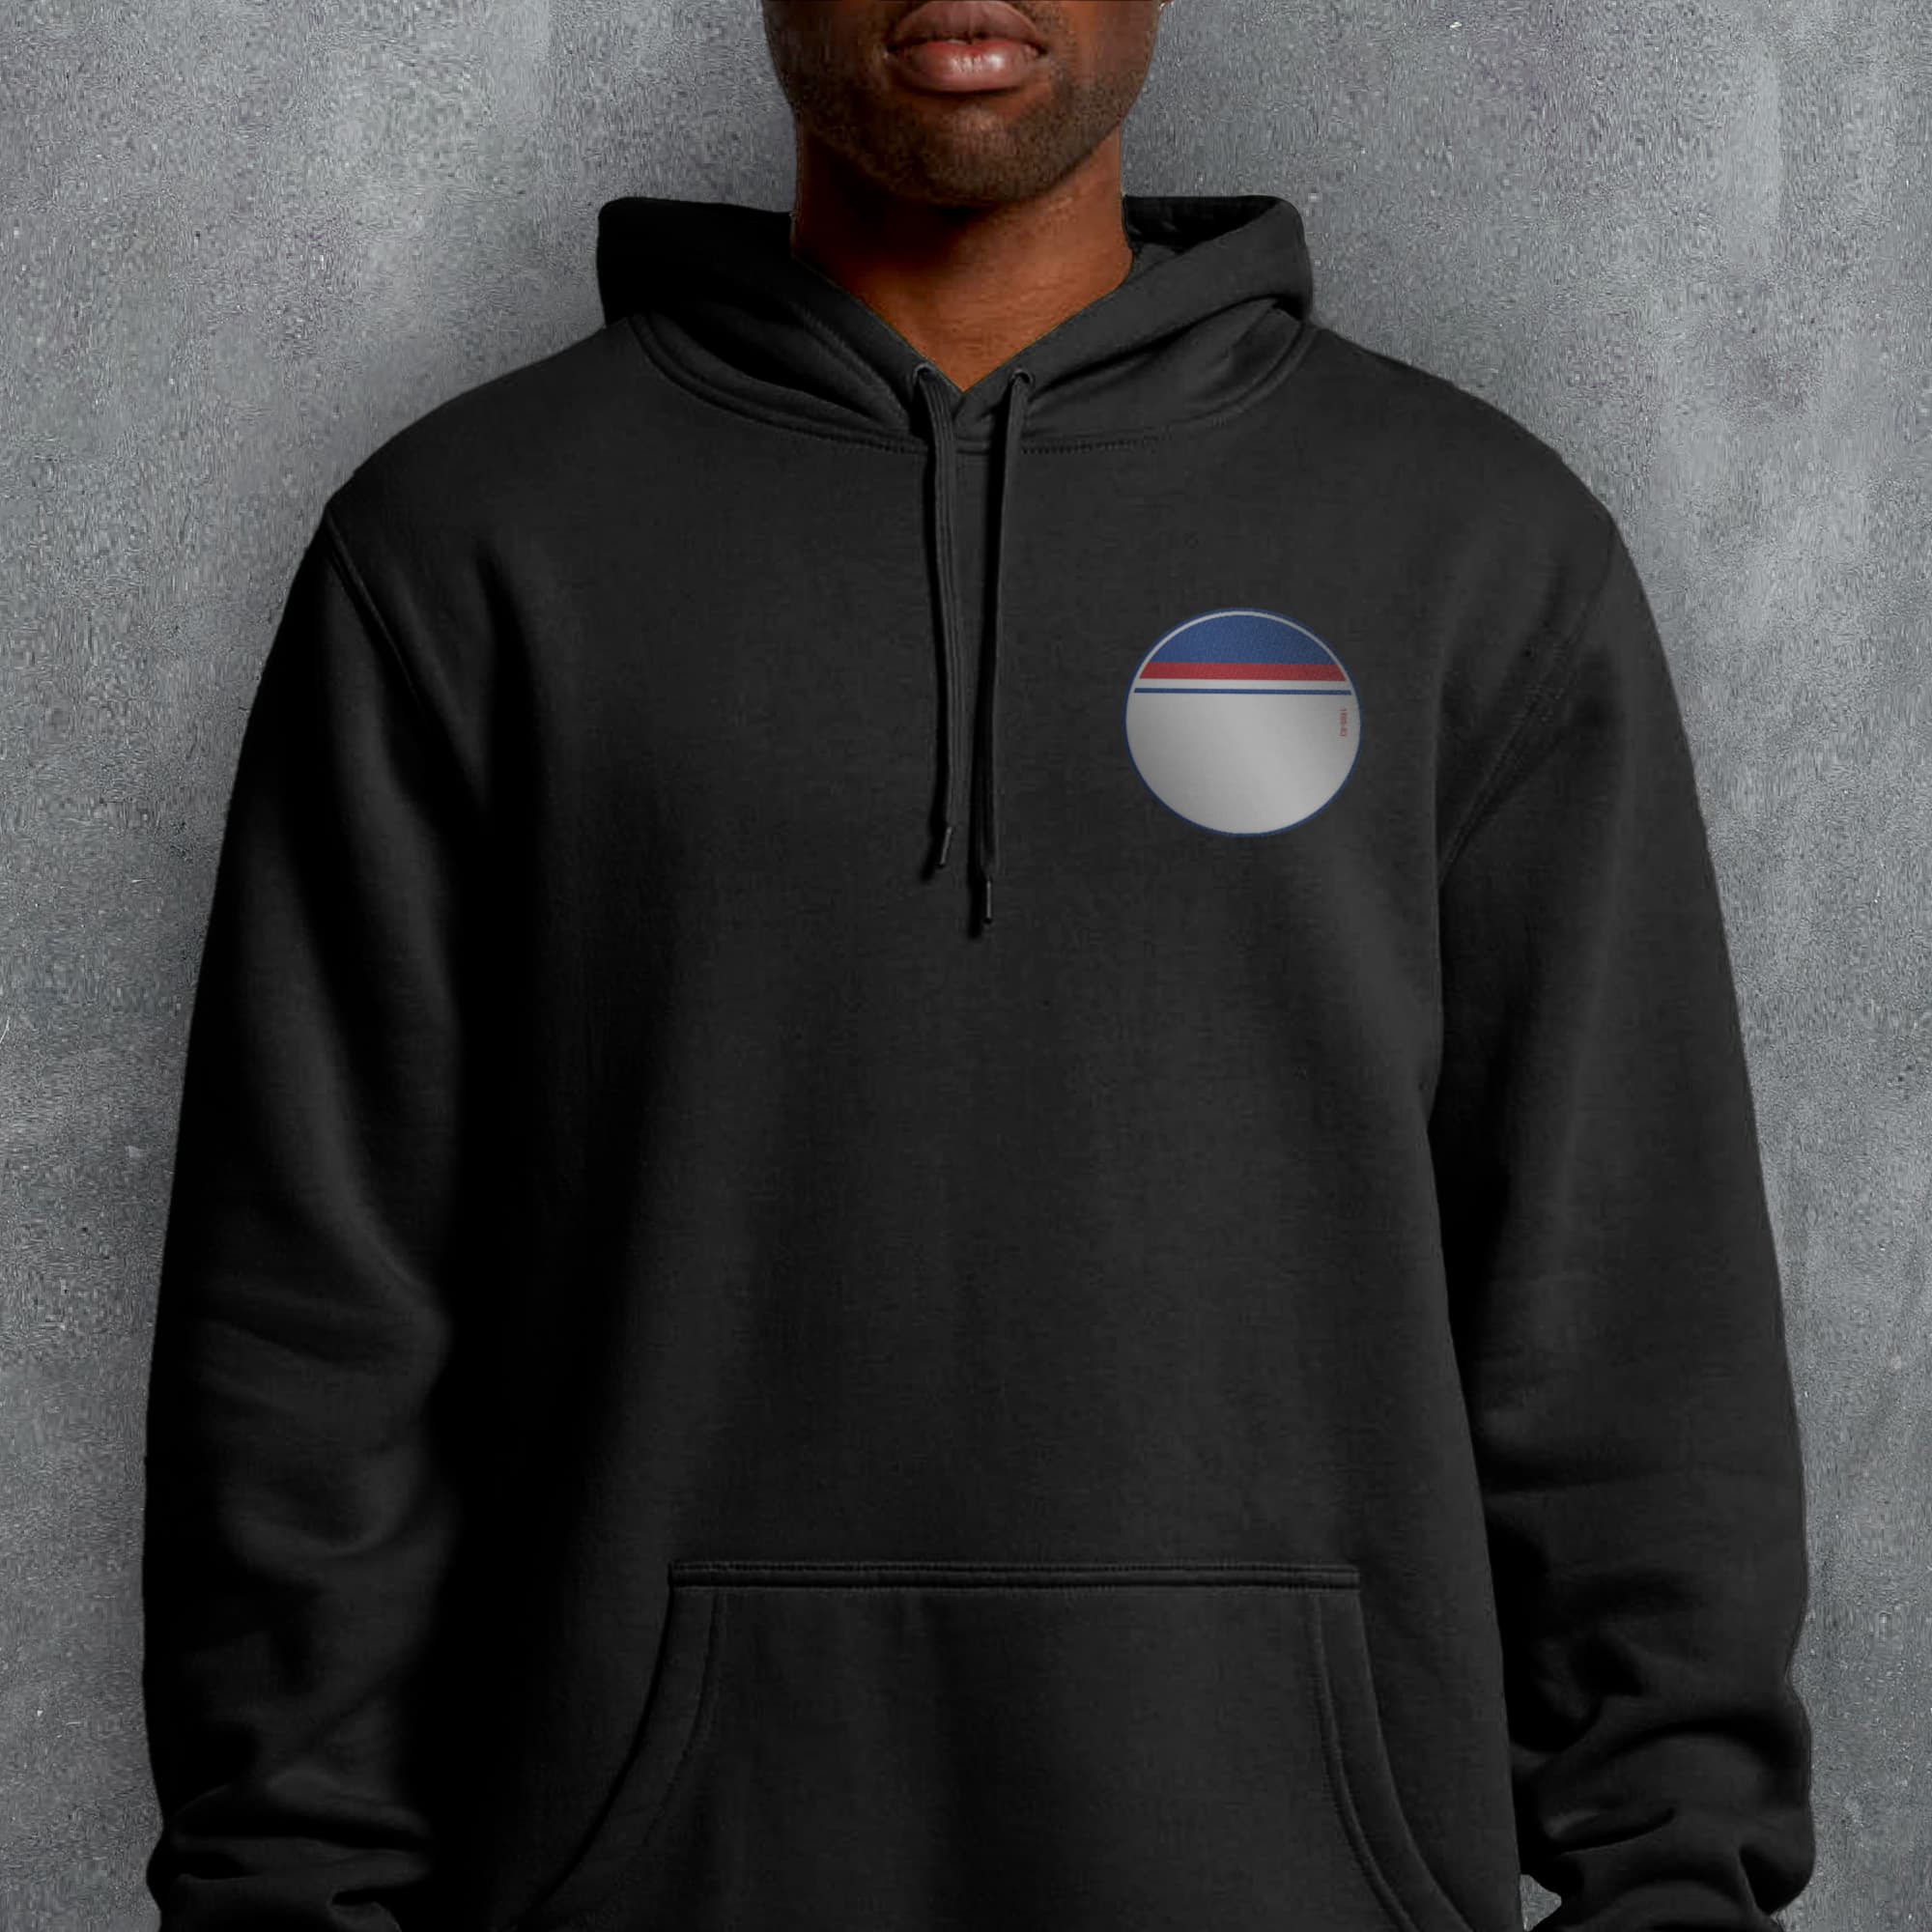 a man wearing a black hoodie with a pepsi logo on it